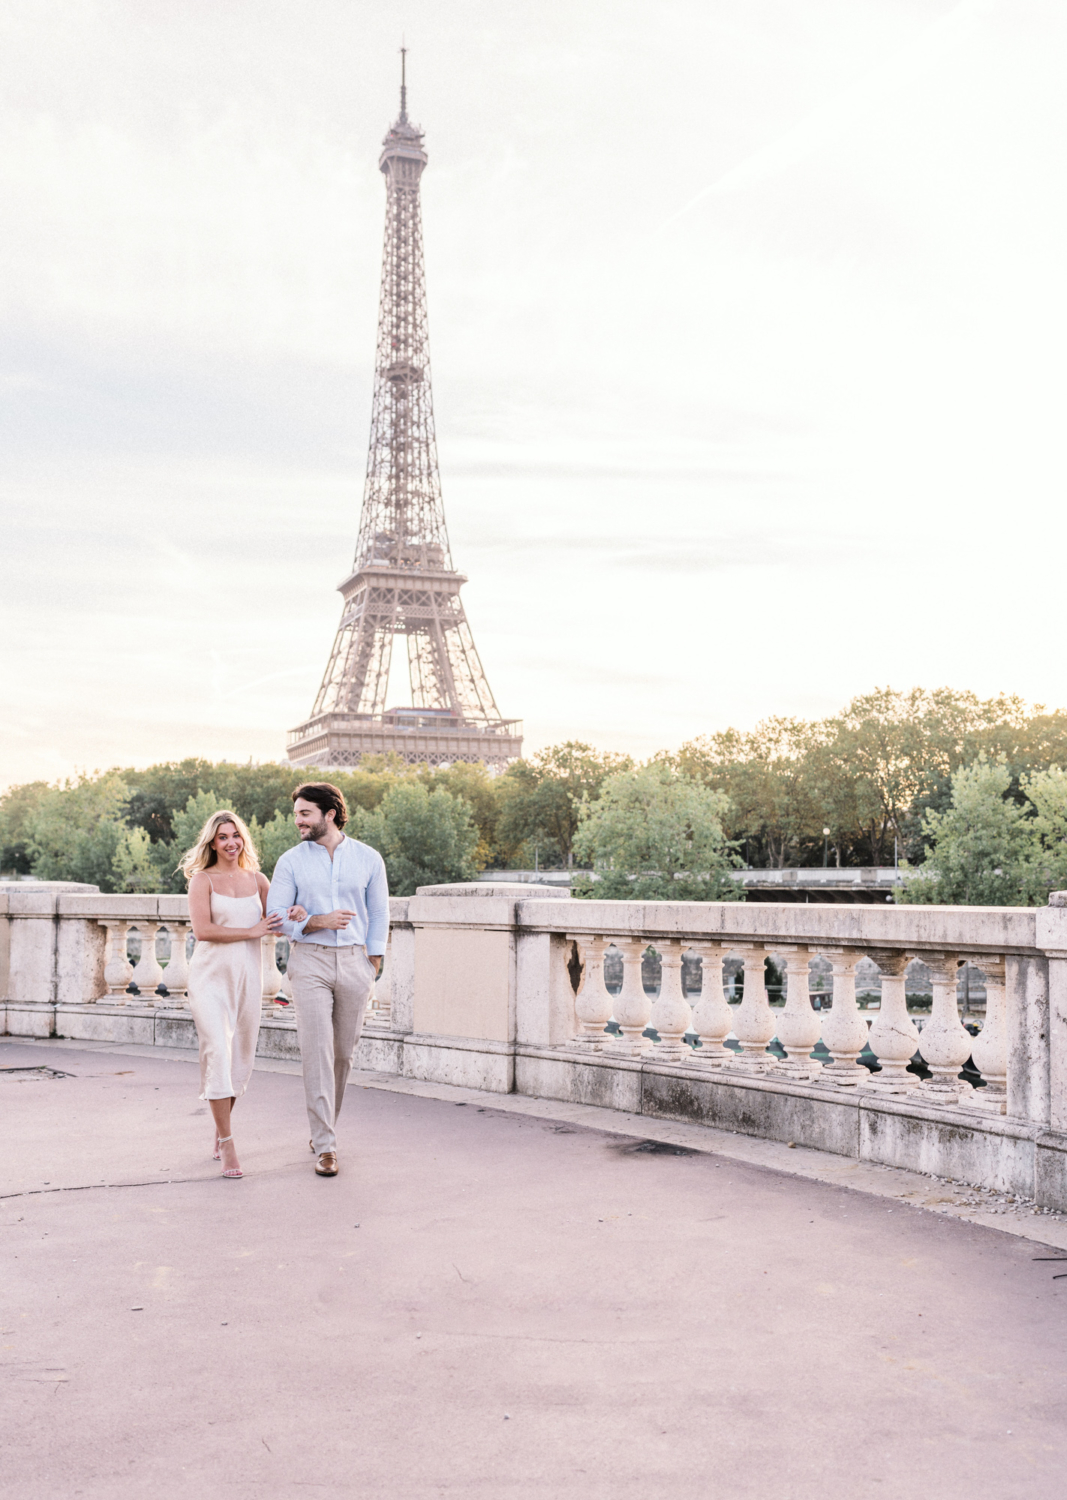 engaged young couple laugh while walking arm in arm with view of eiffel tower